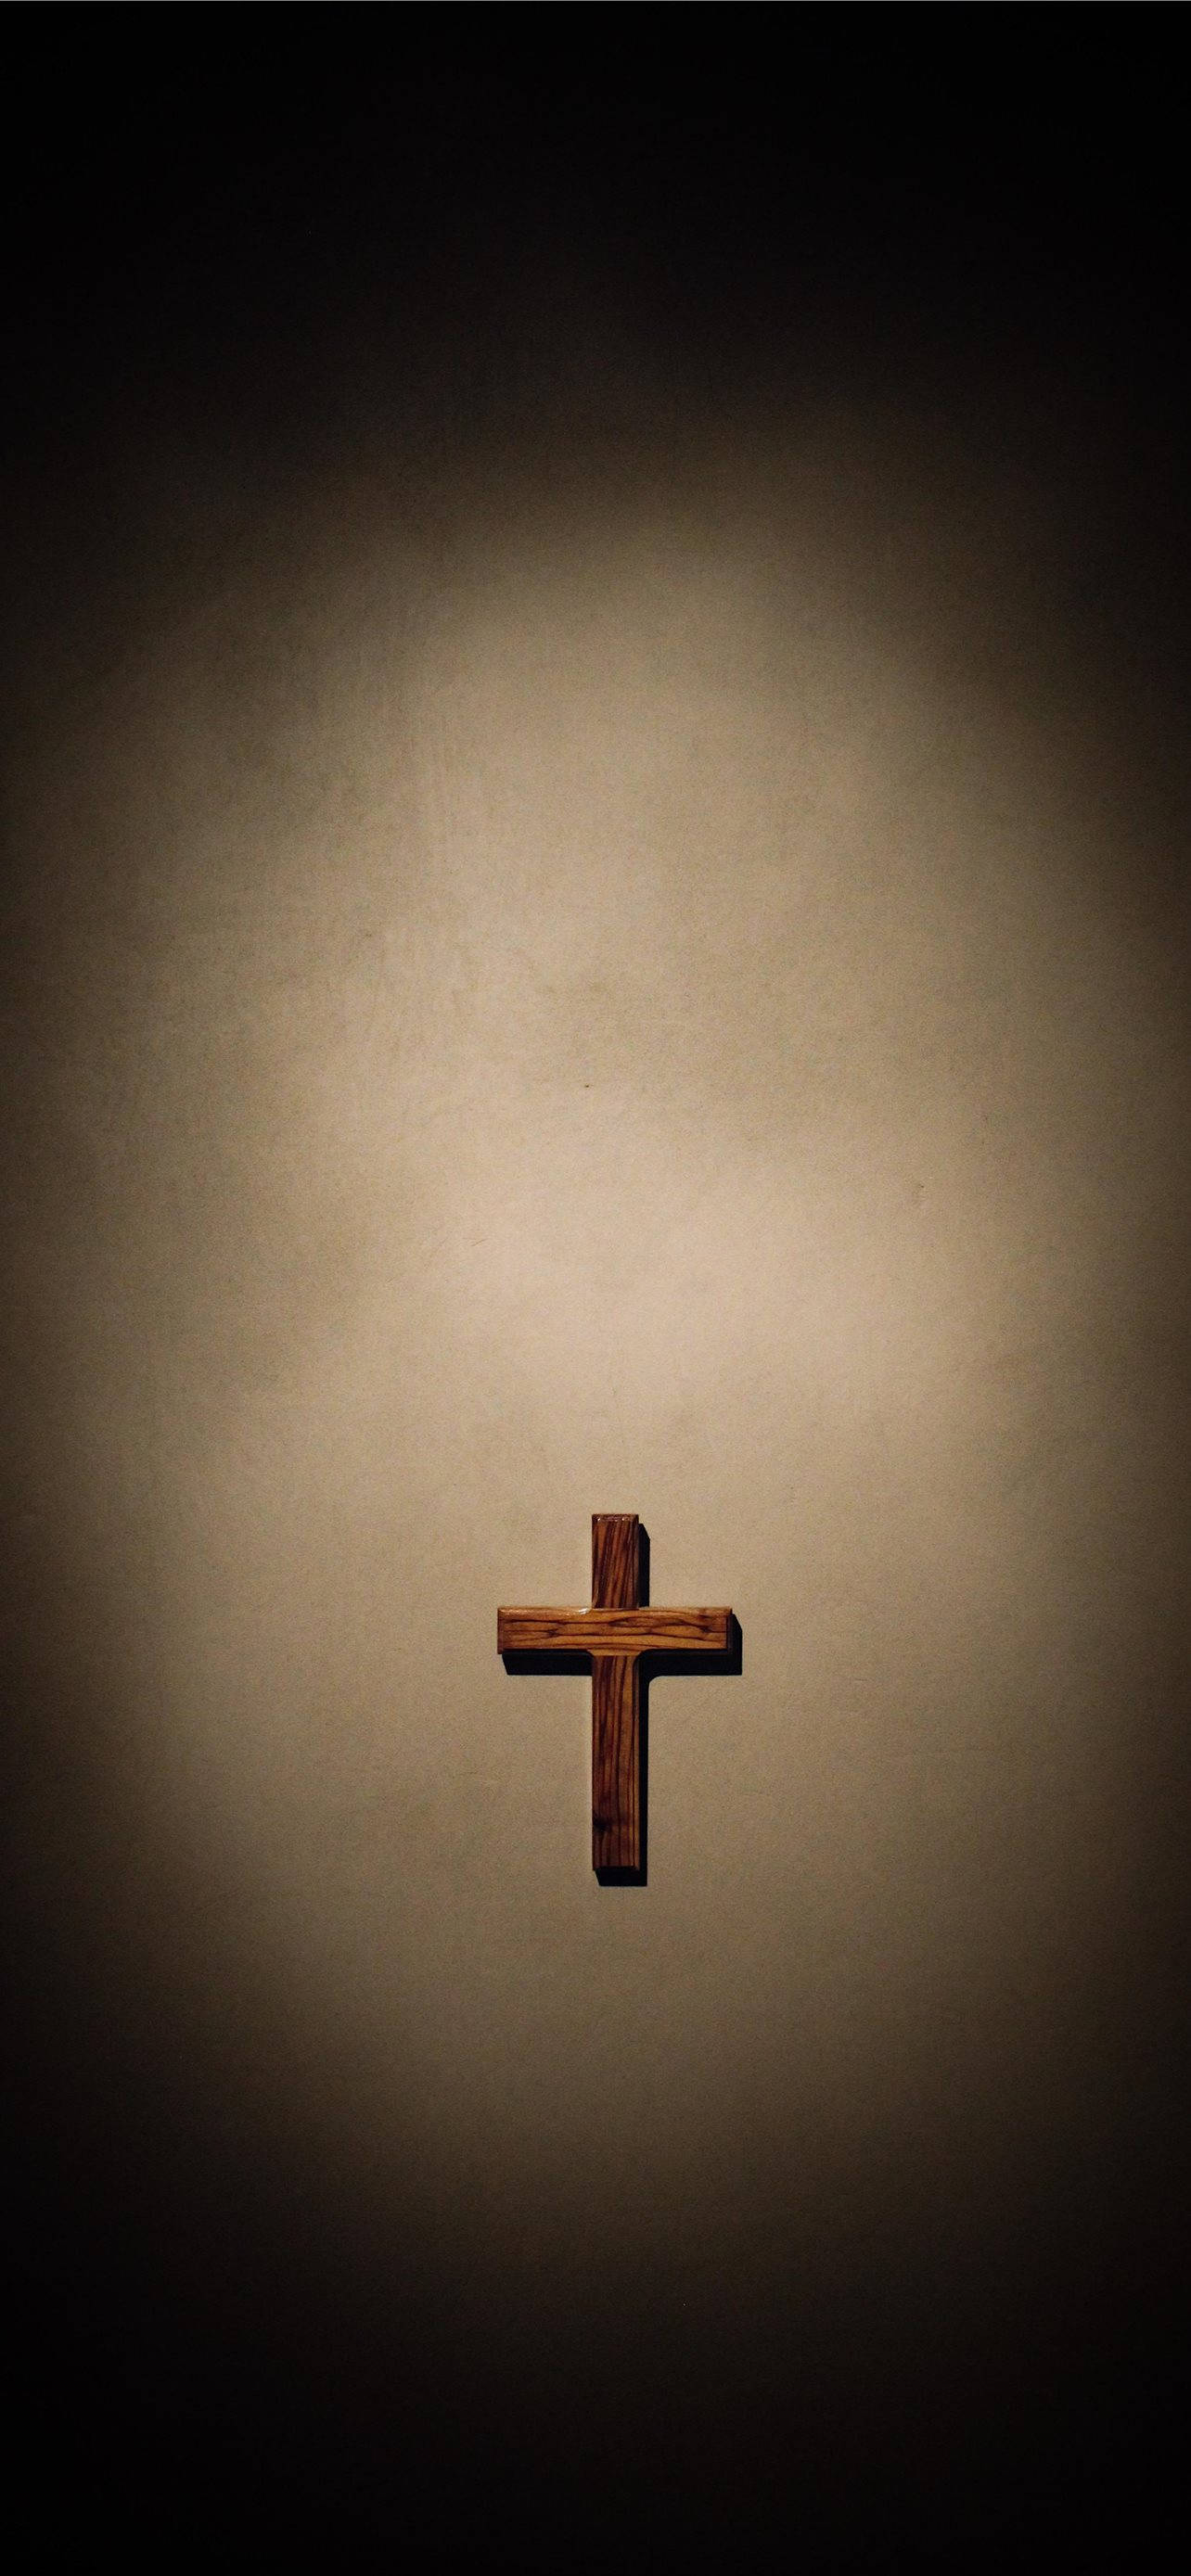 Little Wooden Cross On A Dim Lit Background In Commemoration Of The Holy Good Friday Celebration